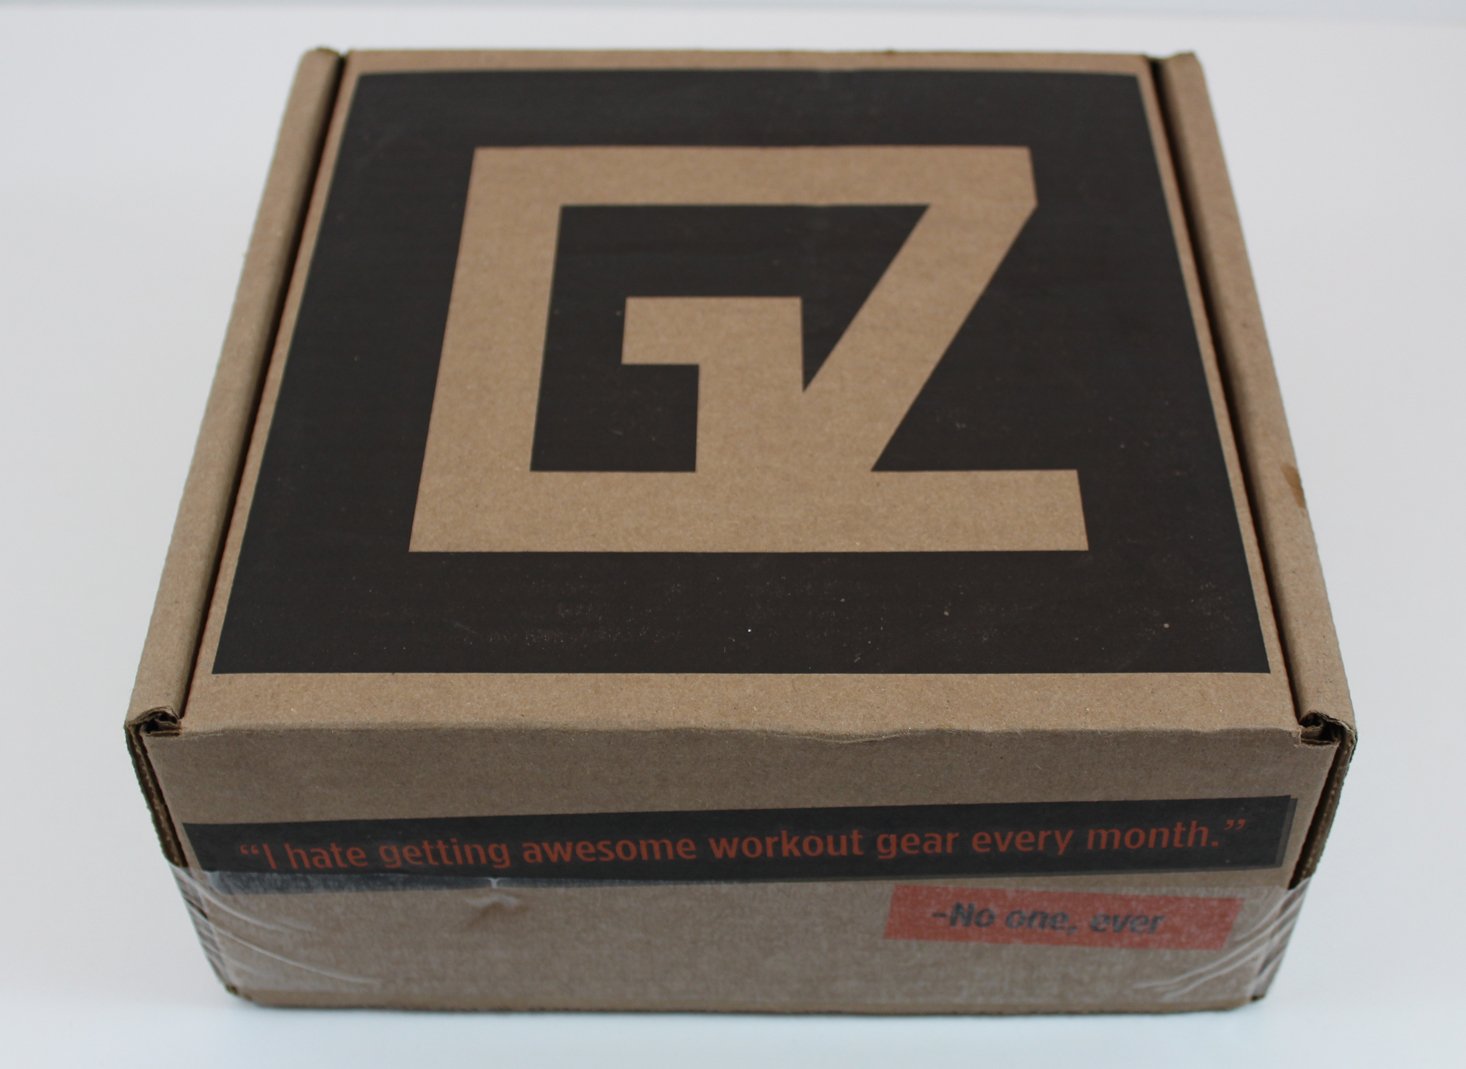 Gainz Box Subscription Review + Coupon – October 2017